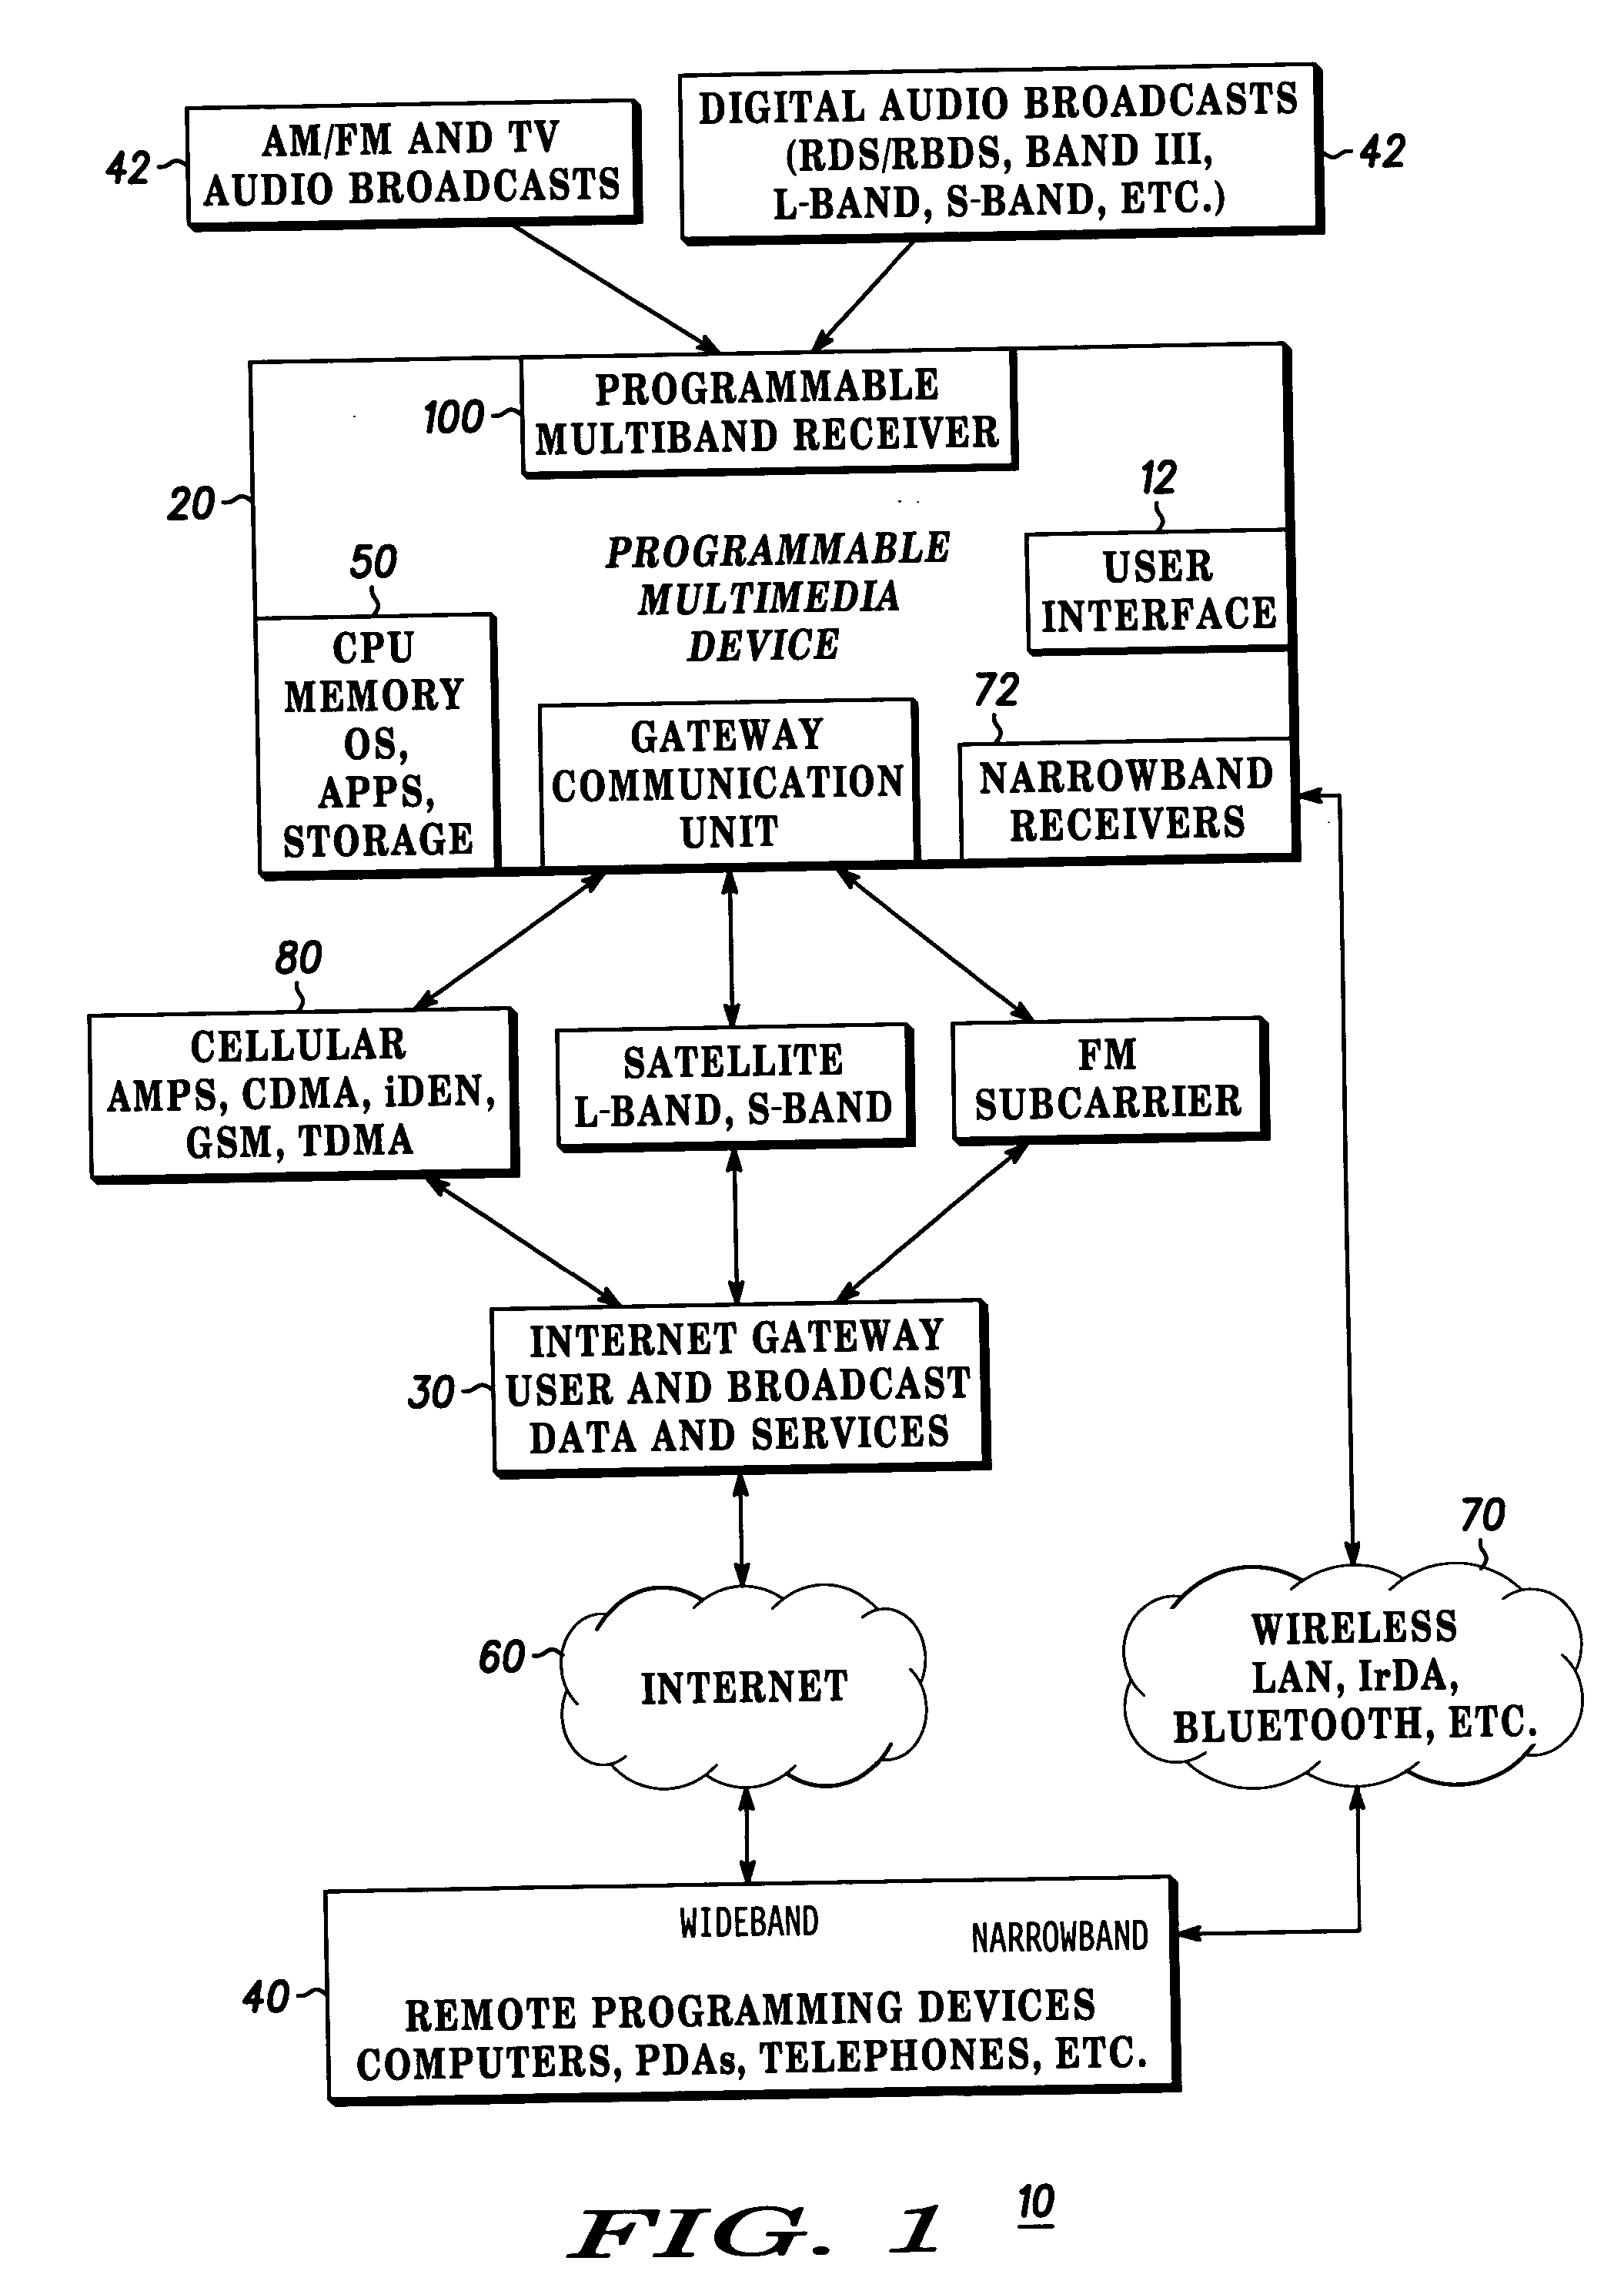 Method and apparatus for playing content